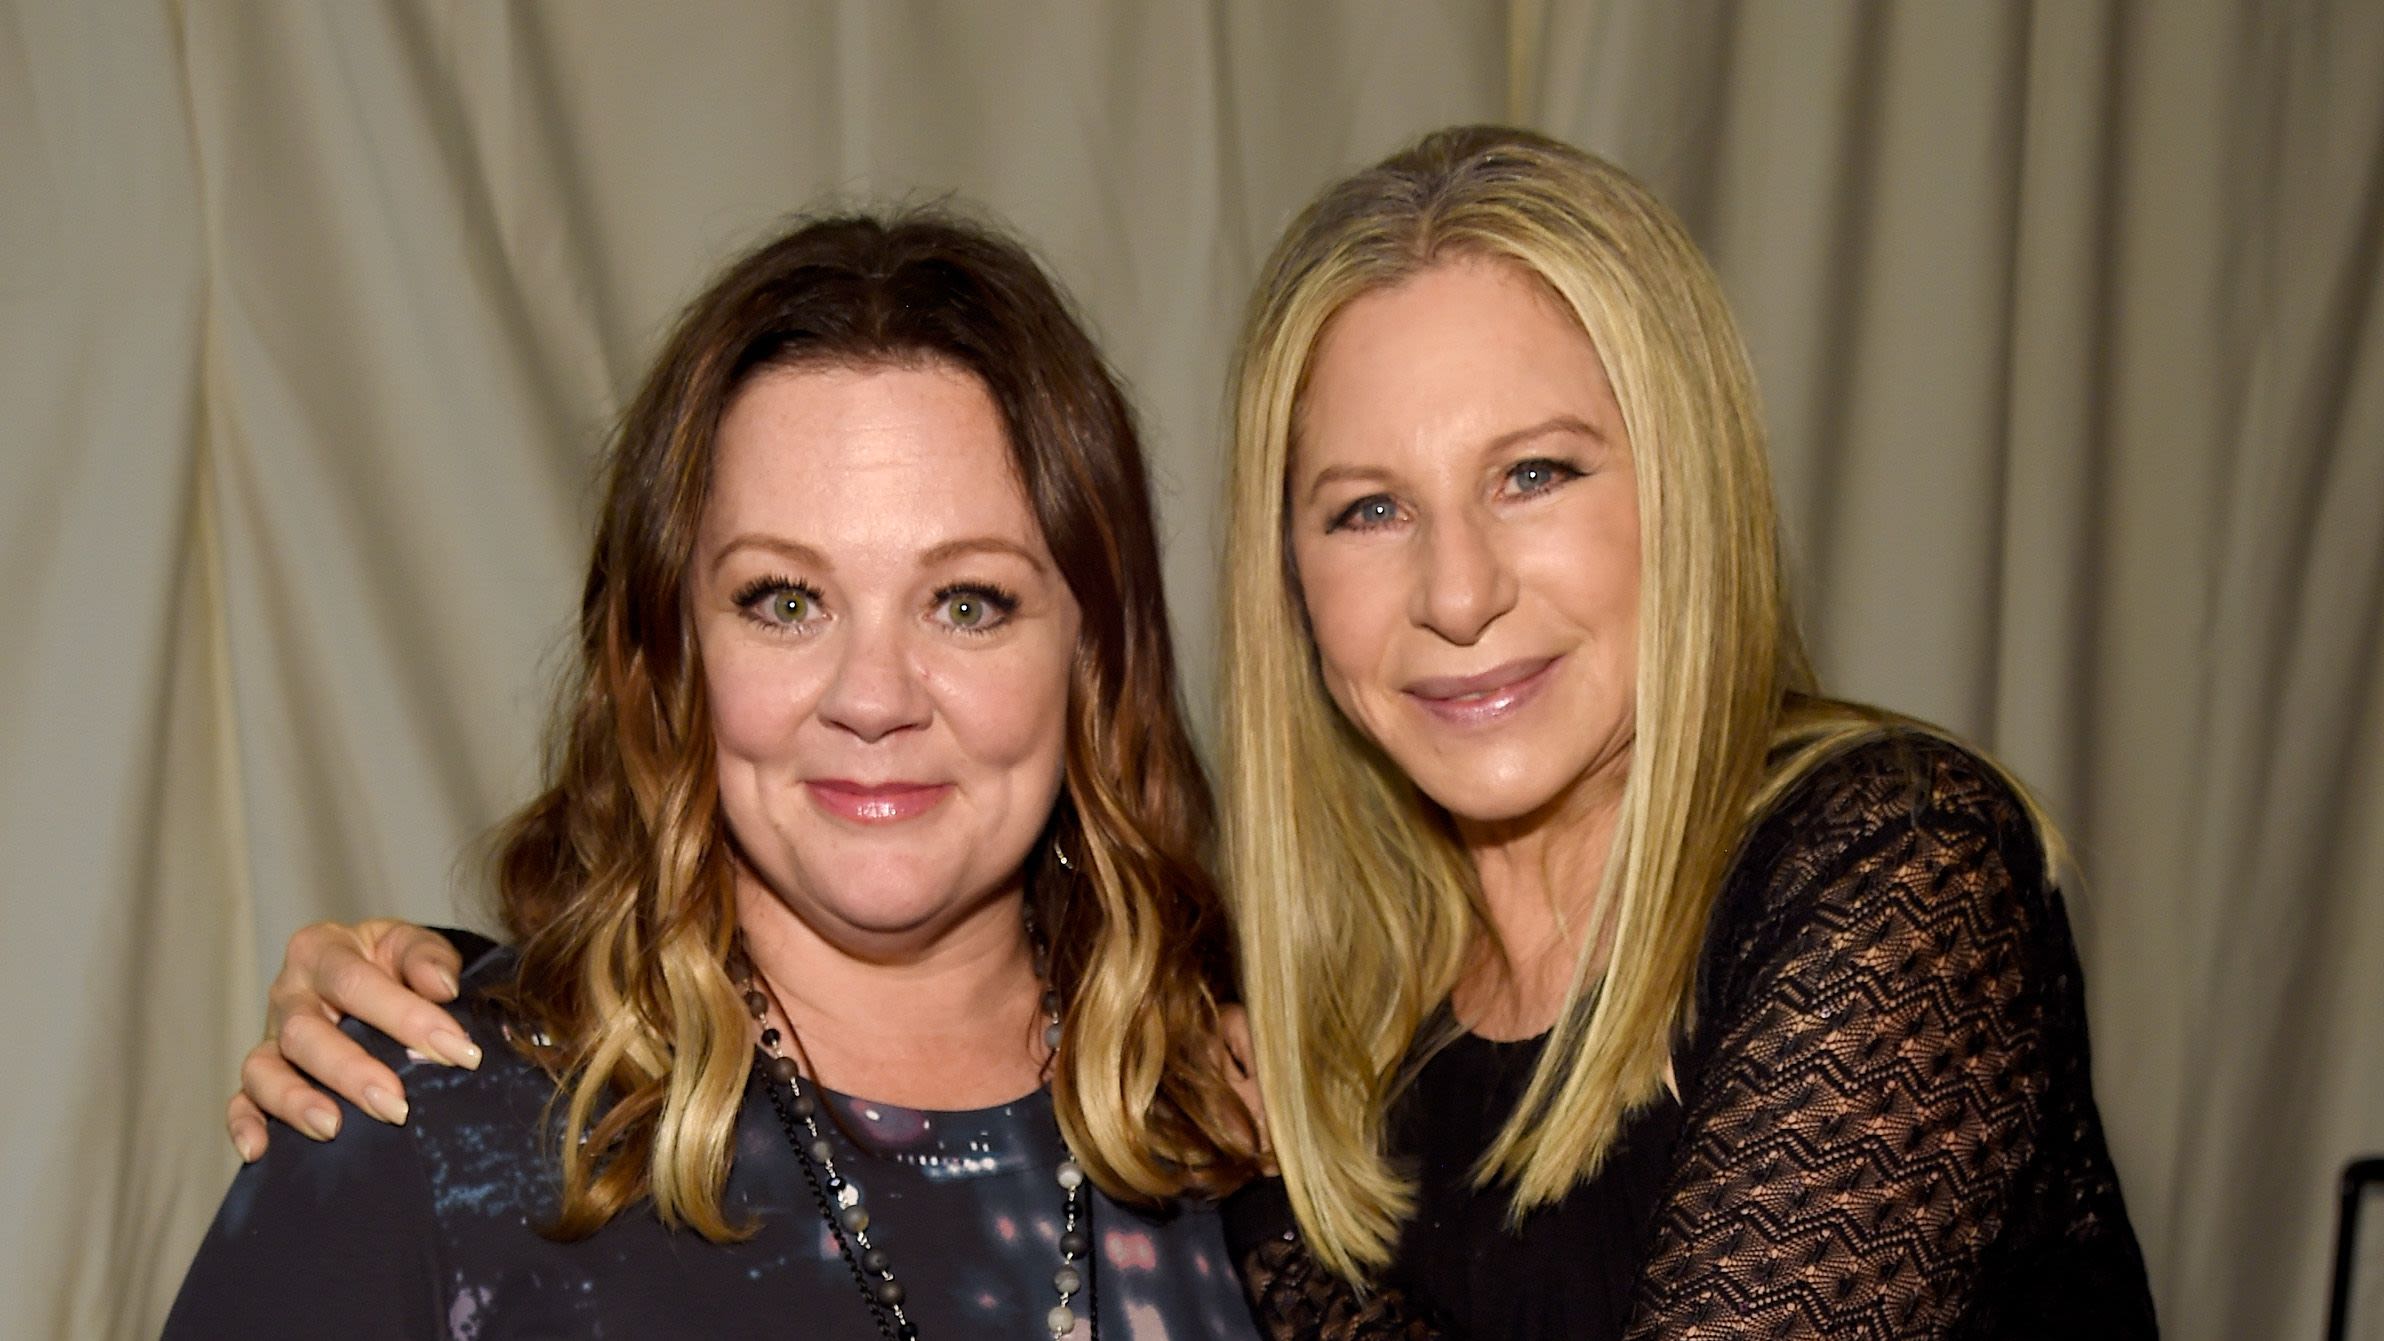 Barbra Streisand Asked Melissa McCarthy If She Used Ozempic. The Internet Had Thoughts